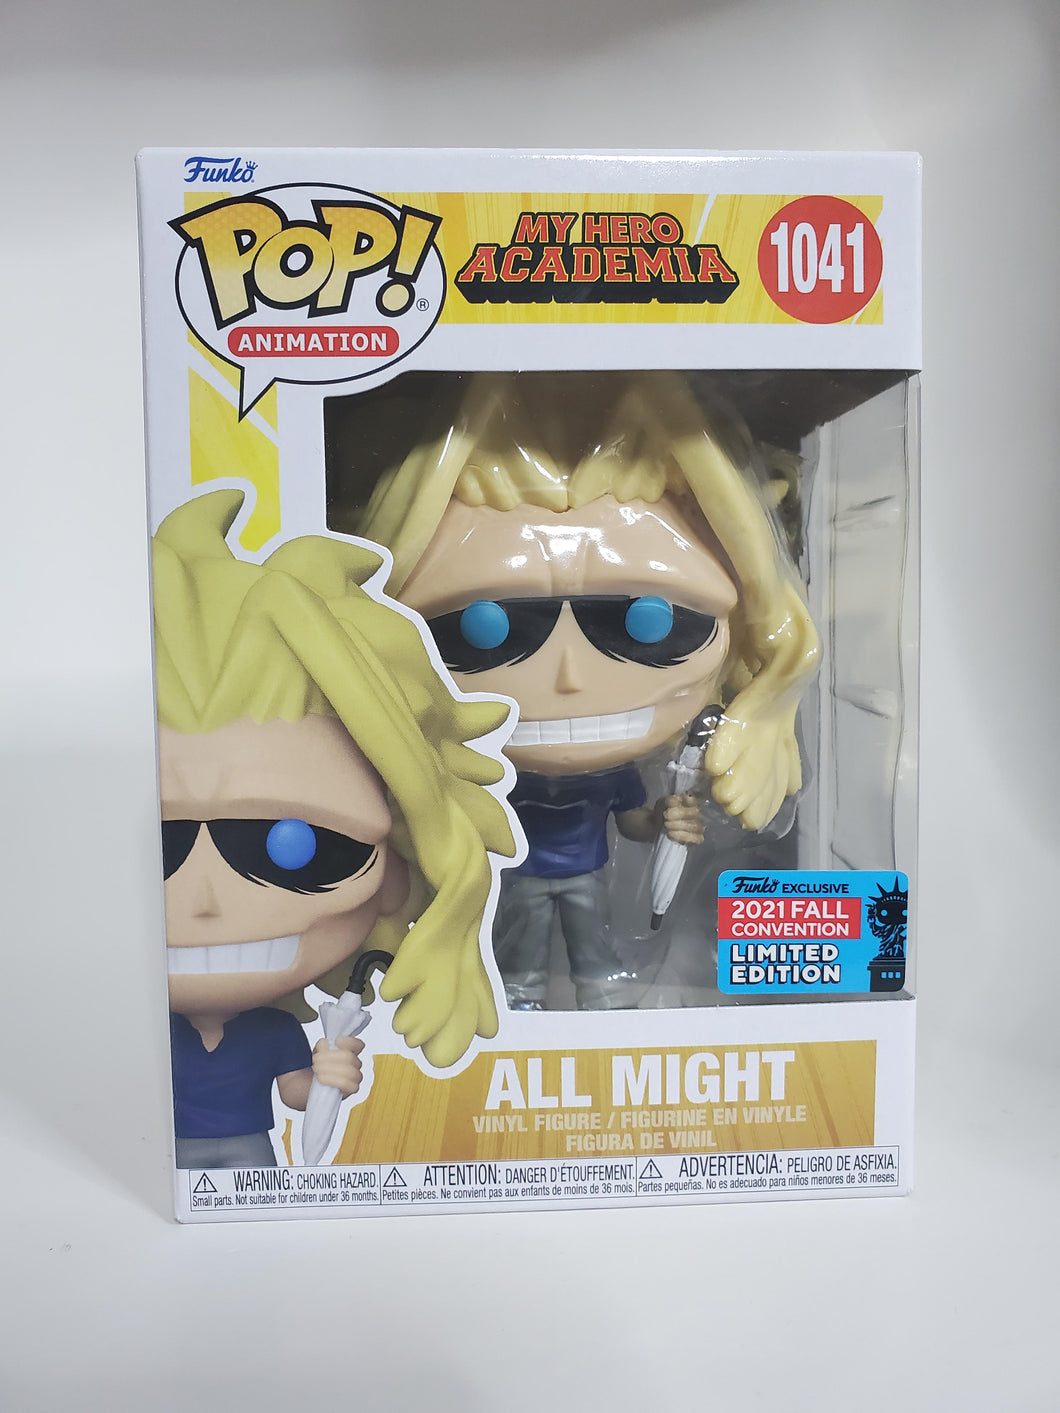 My Hero Academia Limited Edition All Might 2021 Fall Convention Funko POP